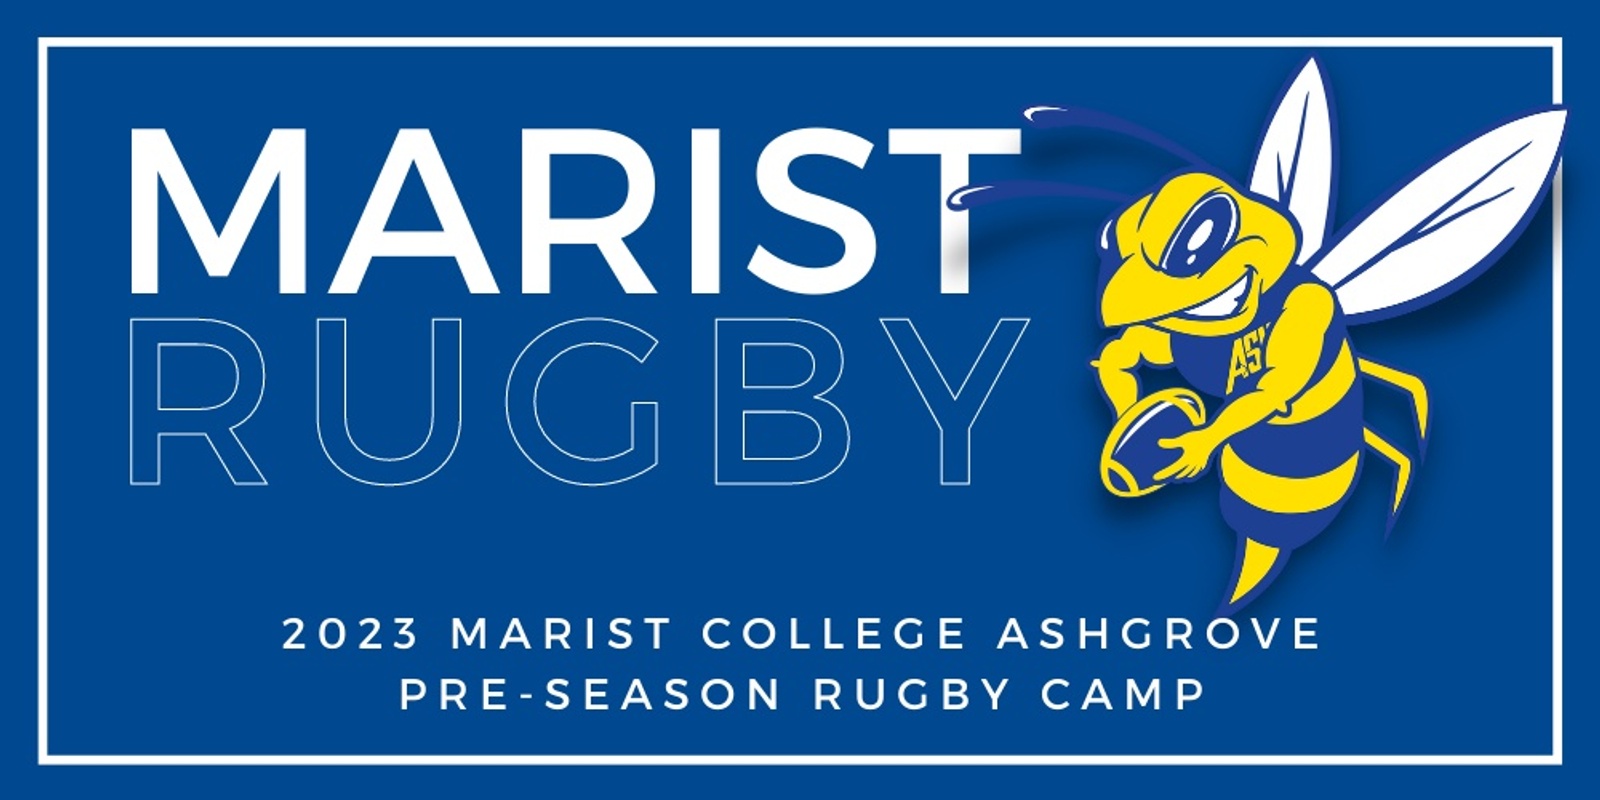 Banner image for Marist Rugby Camp -  Years 5, 6 and 7 